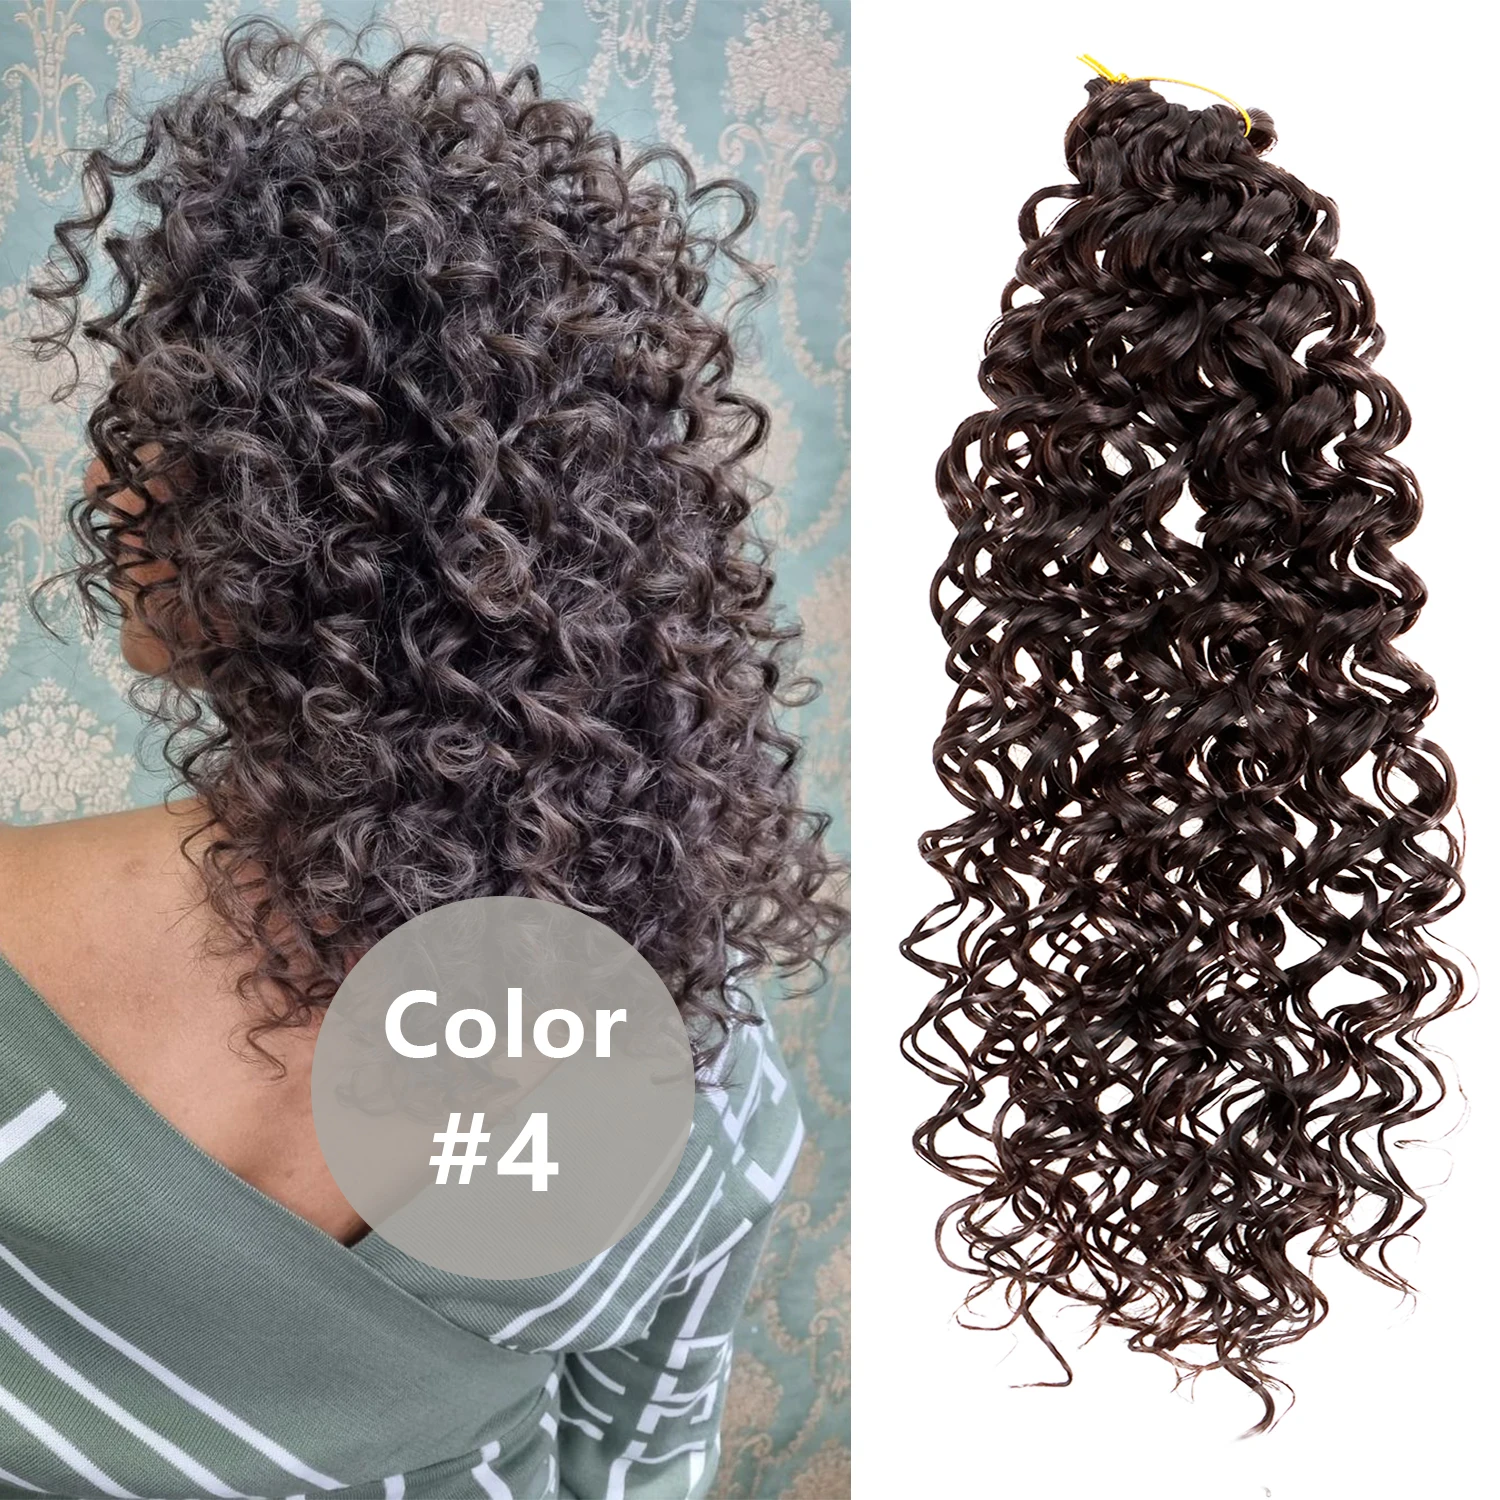 

YxCheris Synthetic GoGo Afro Curl 10 14 18 Inch Crochet Hair Extension for Women Curly Braids Ombre Black Gold Brown Burgundy